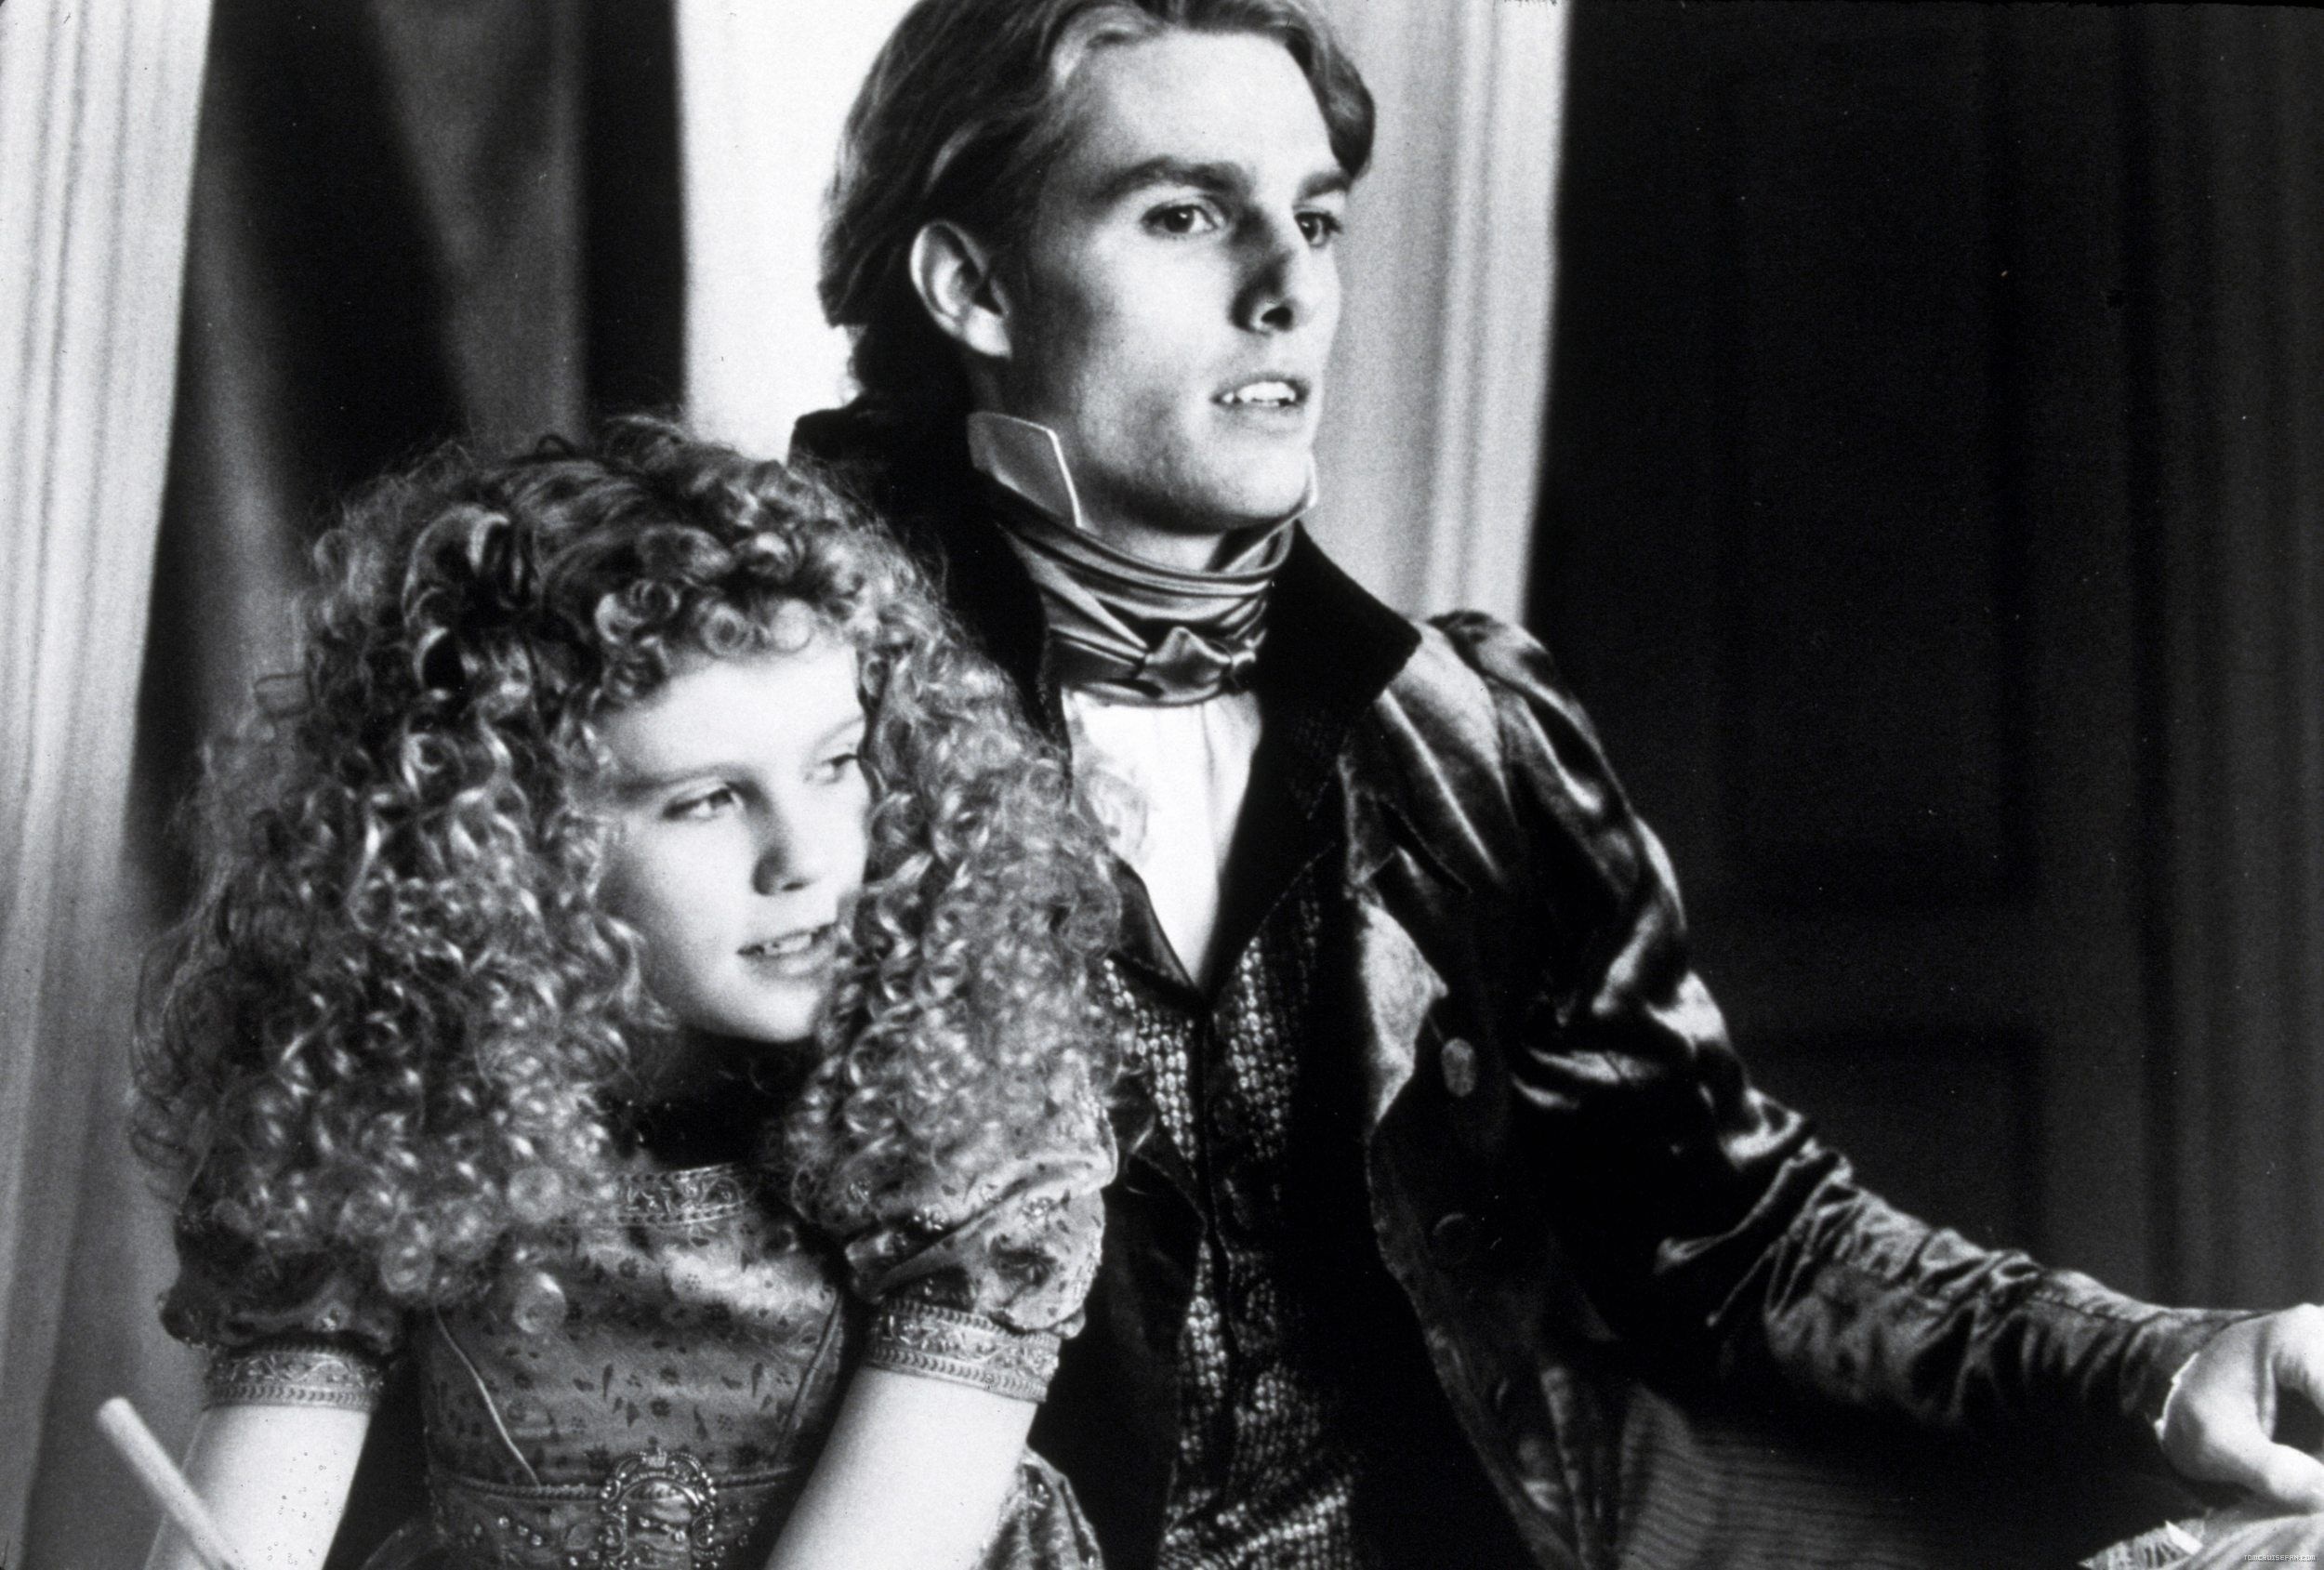 Tom Cruise, Lestat character, Interview with the Vampire, Vampire Chronicles, 2500x1690 HD Desktop